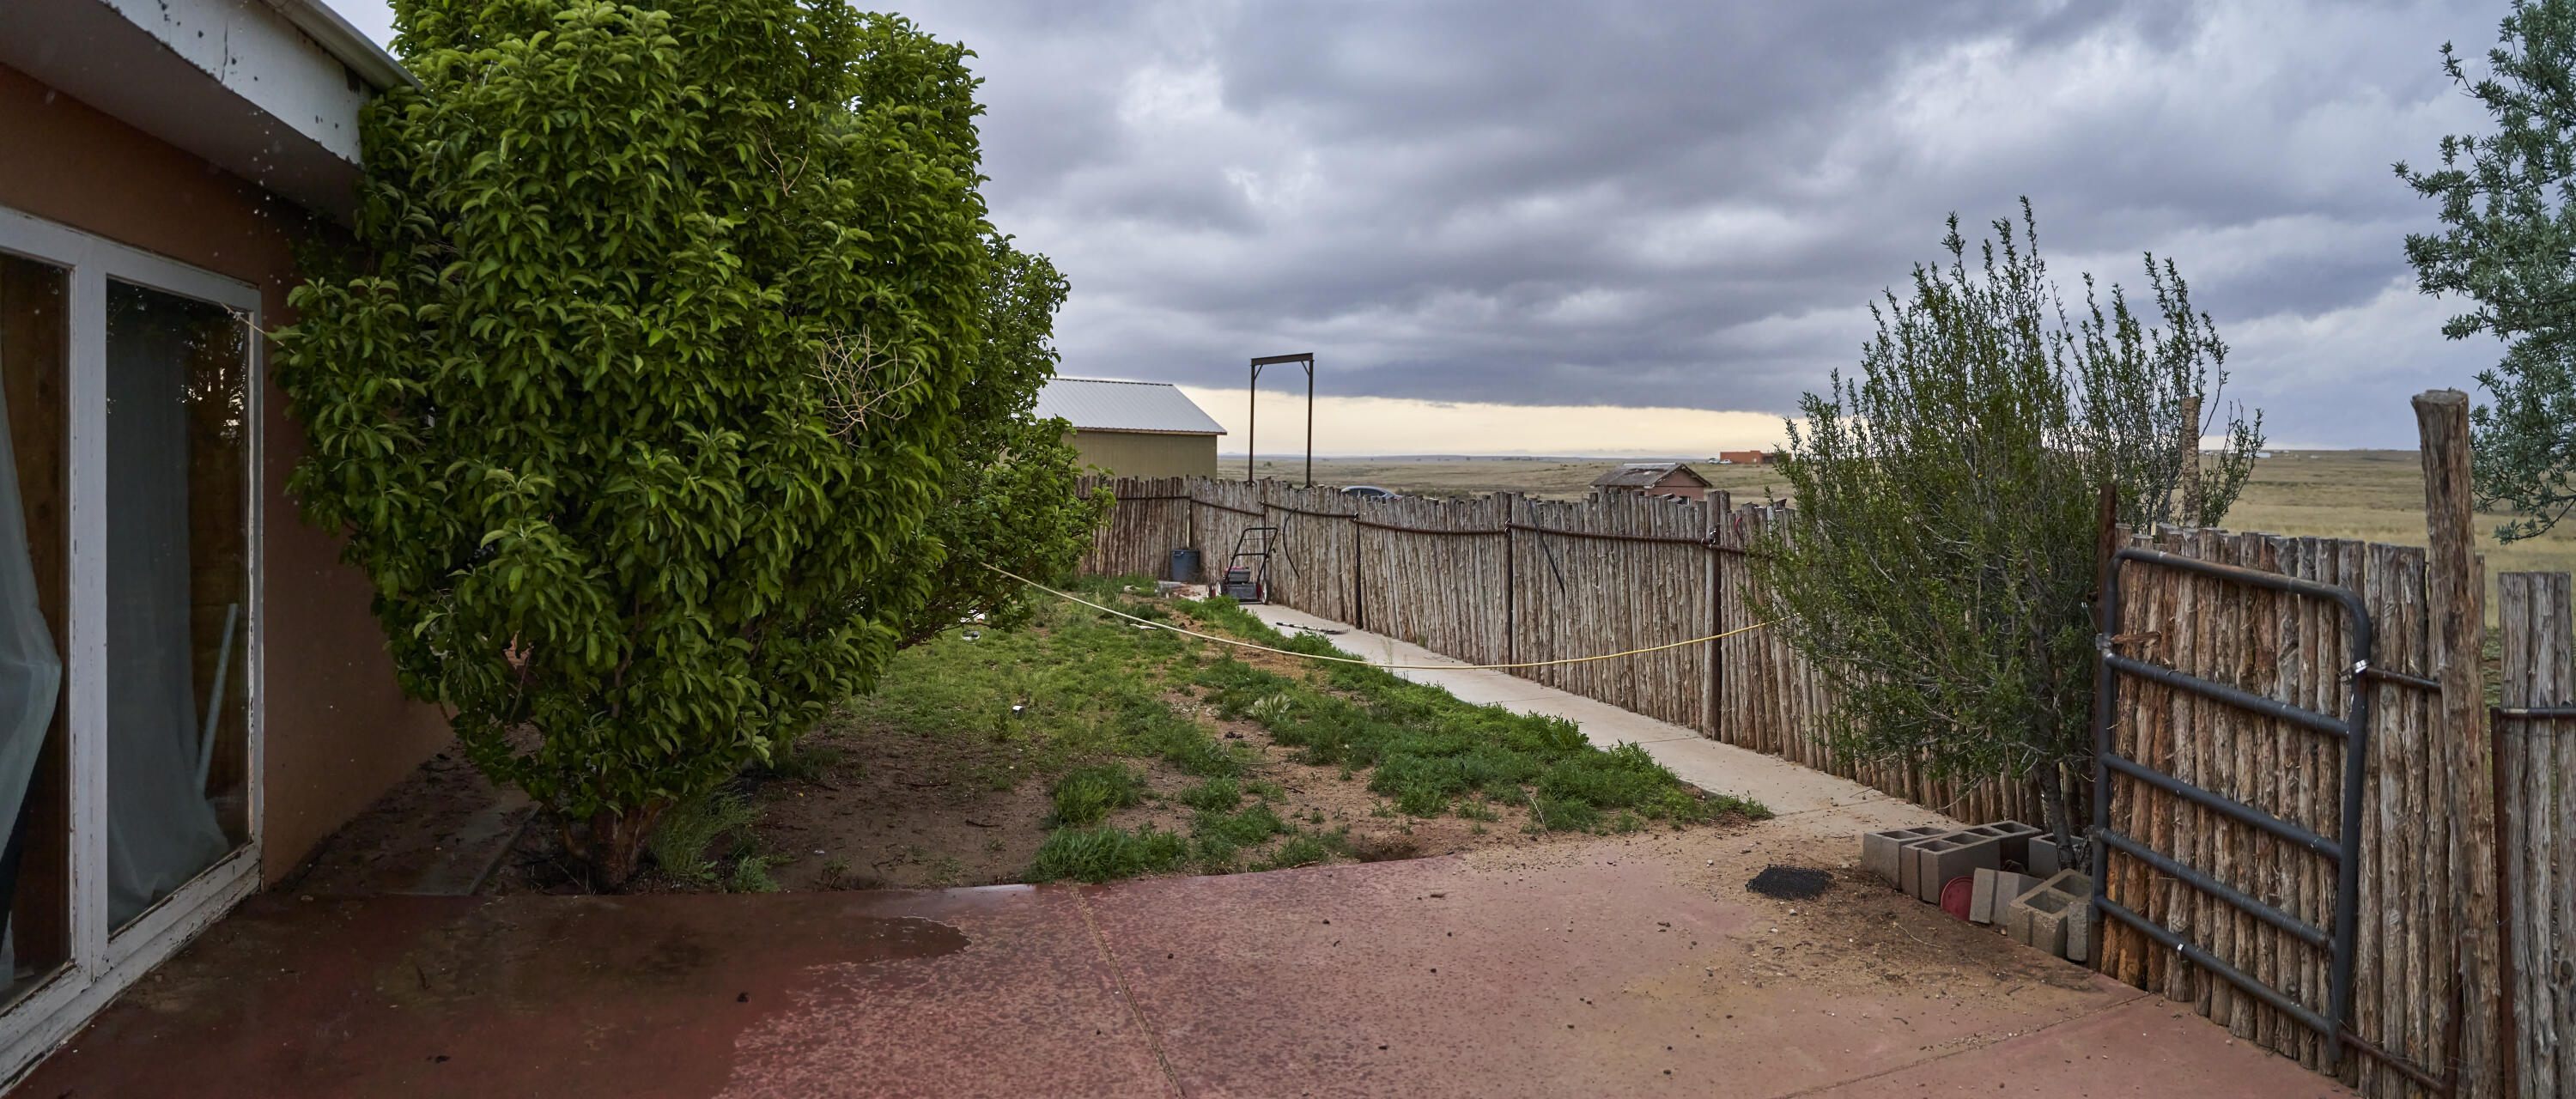 5 Yucca Lane, Moriarty, New Mexico 87035, 4 Bedrooms Bedrooms, ,2 BathroomsBathrooms,Residential,For Sale,5 Yucca Lane,1034826